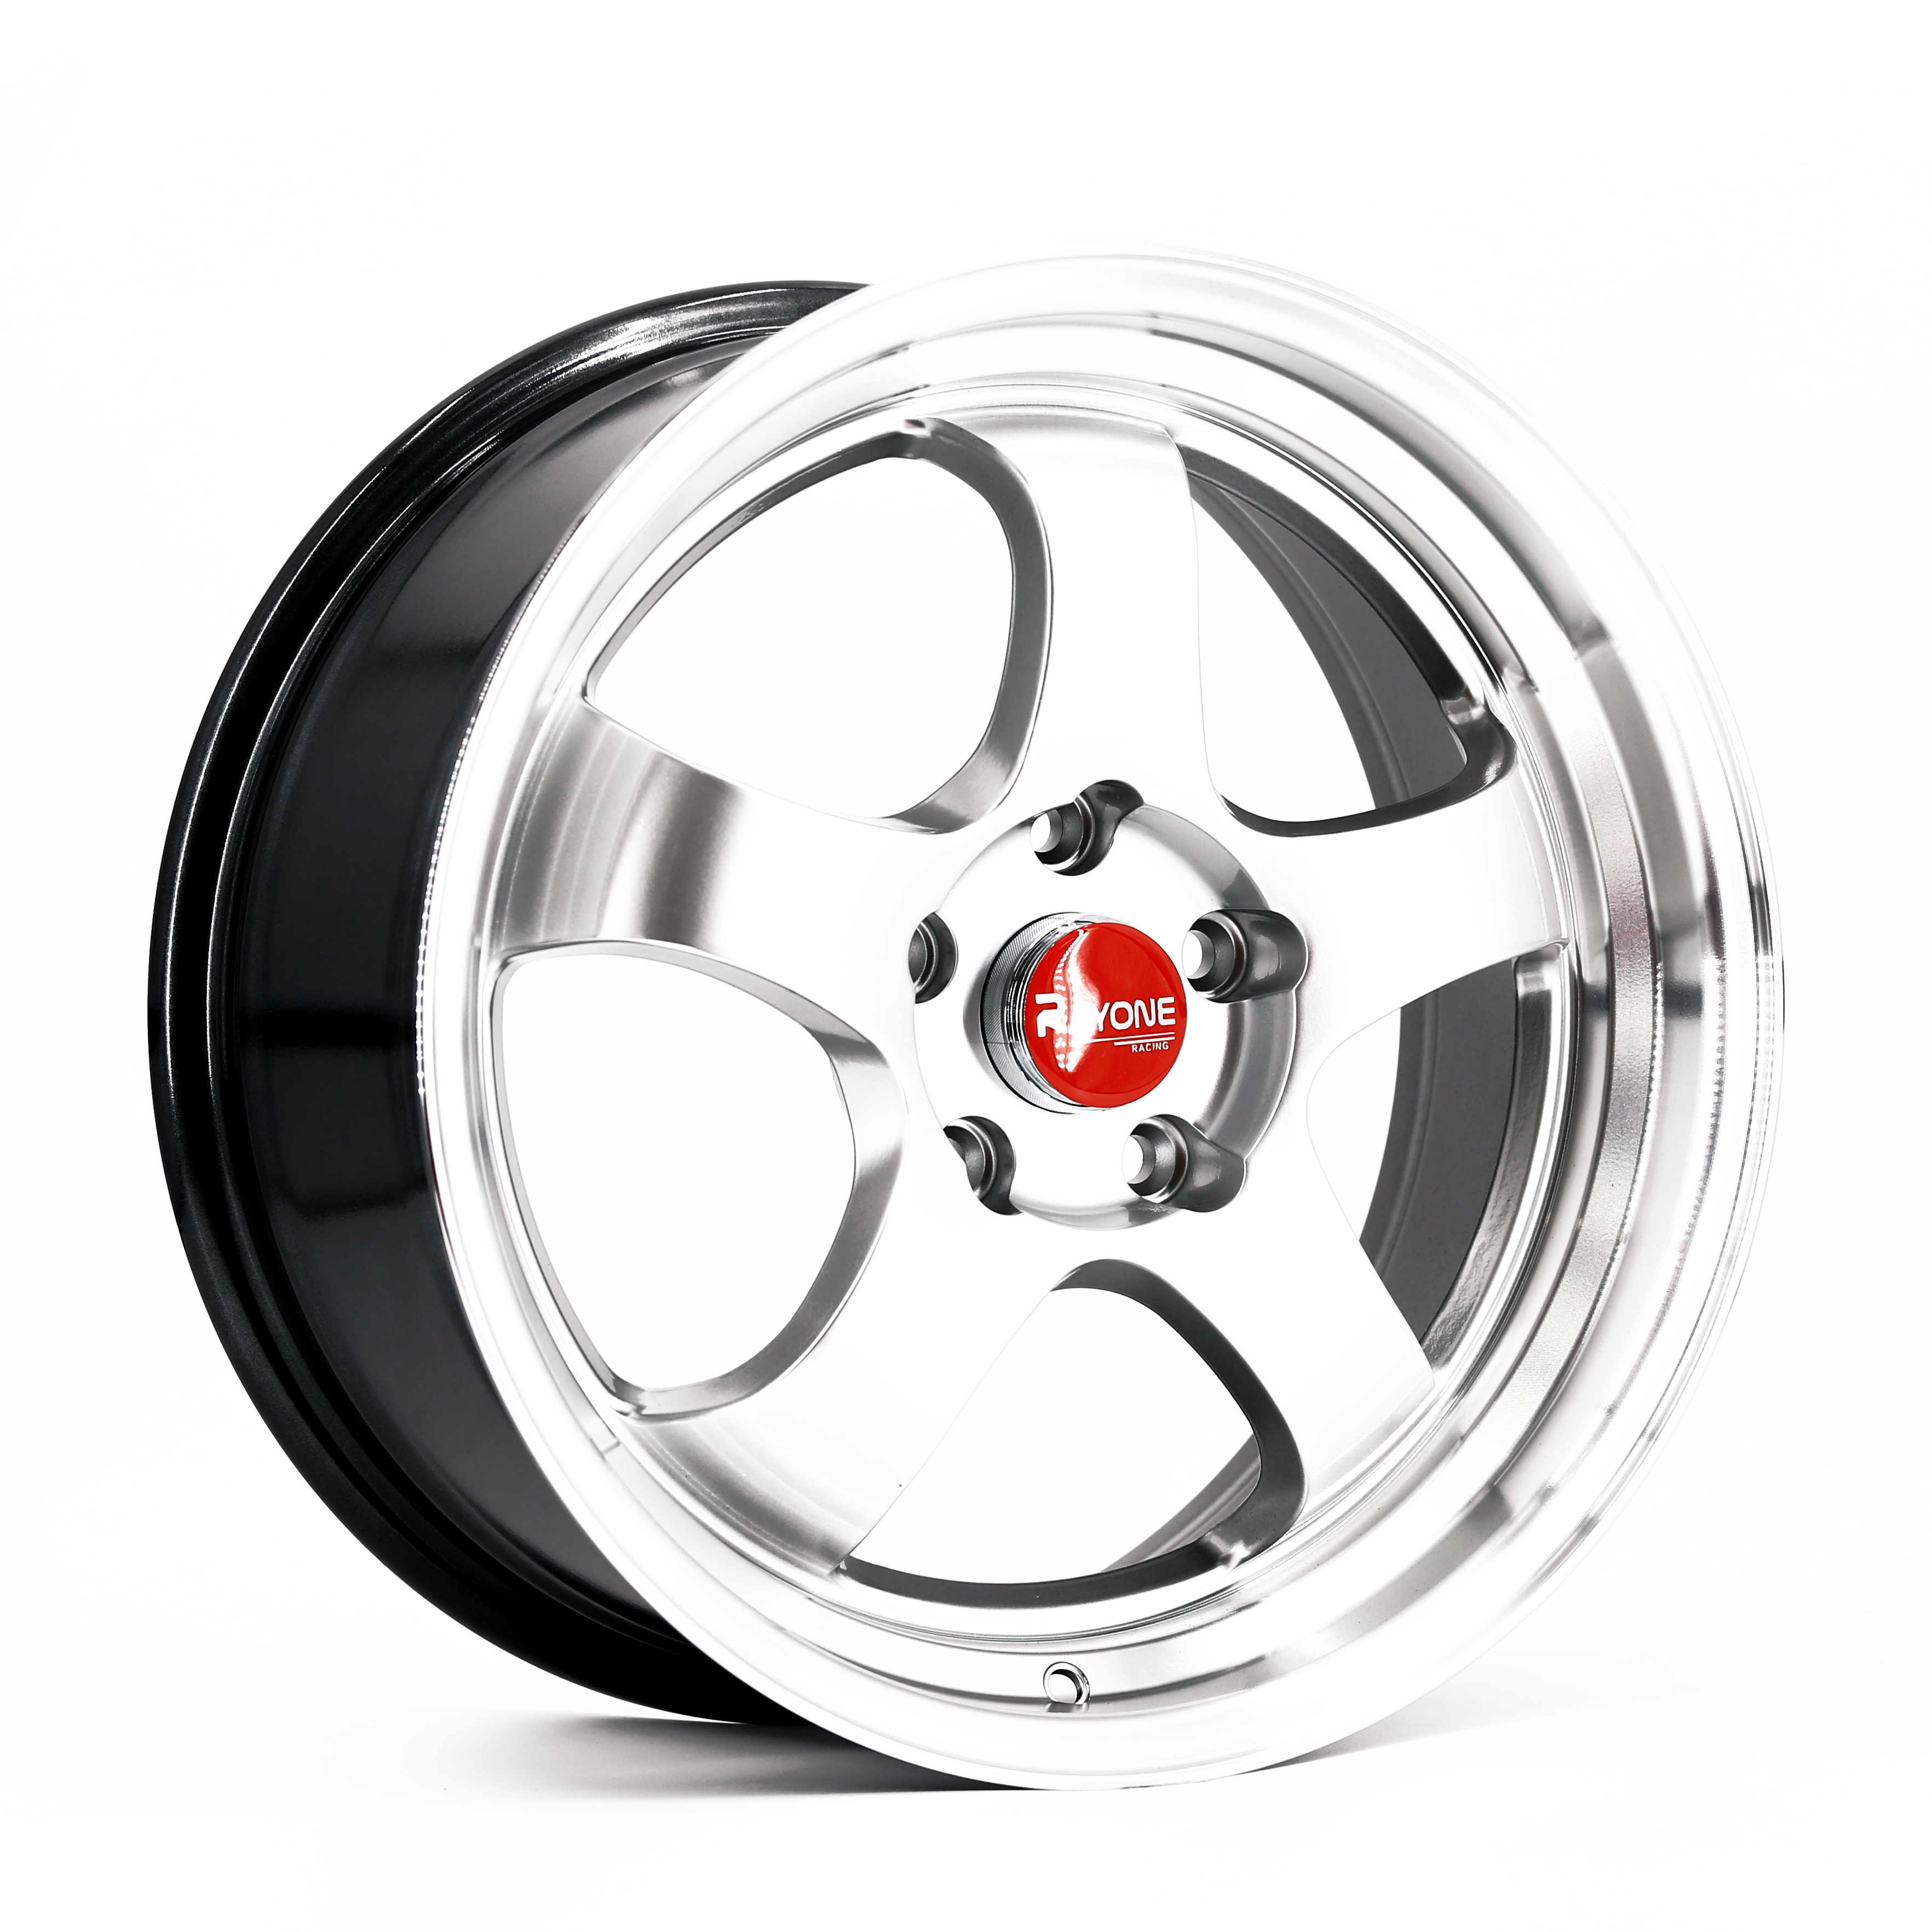 Popular Style 16-19 Inch Multiple Size Gold Color Aluminum Alloy Wheels Rim For Racing